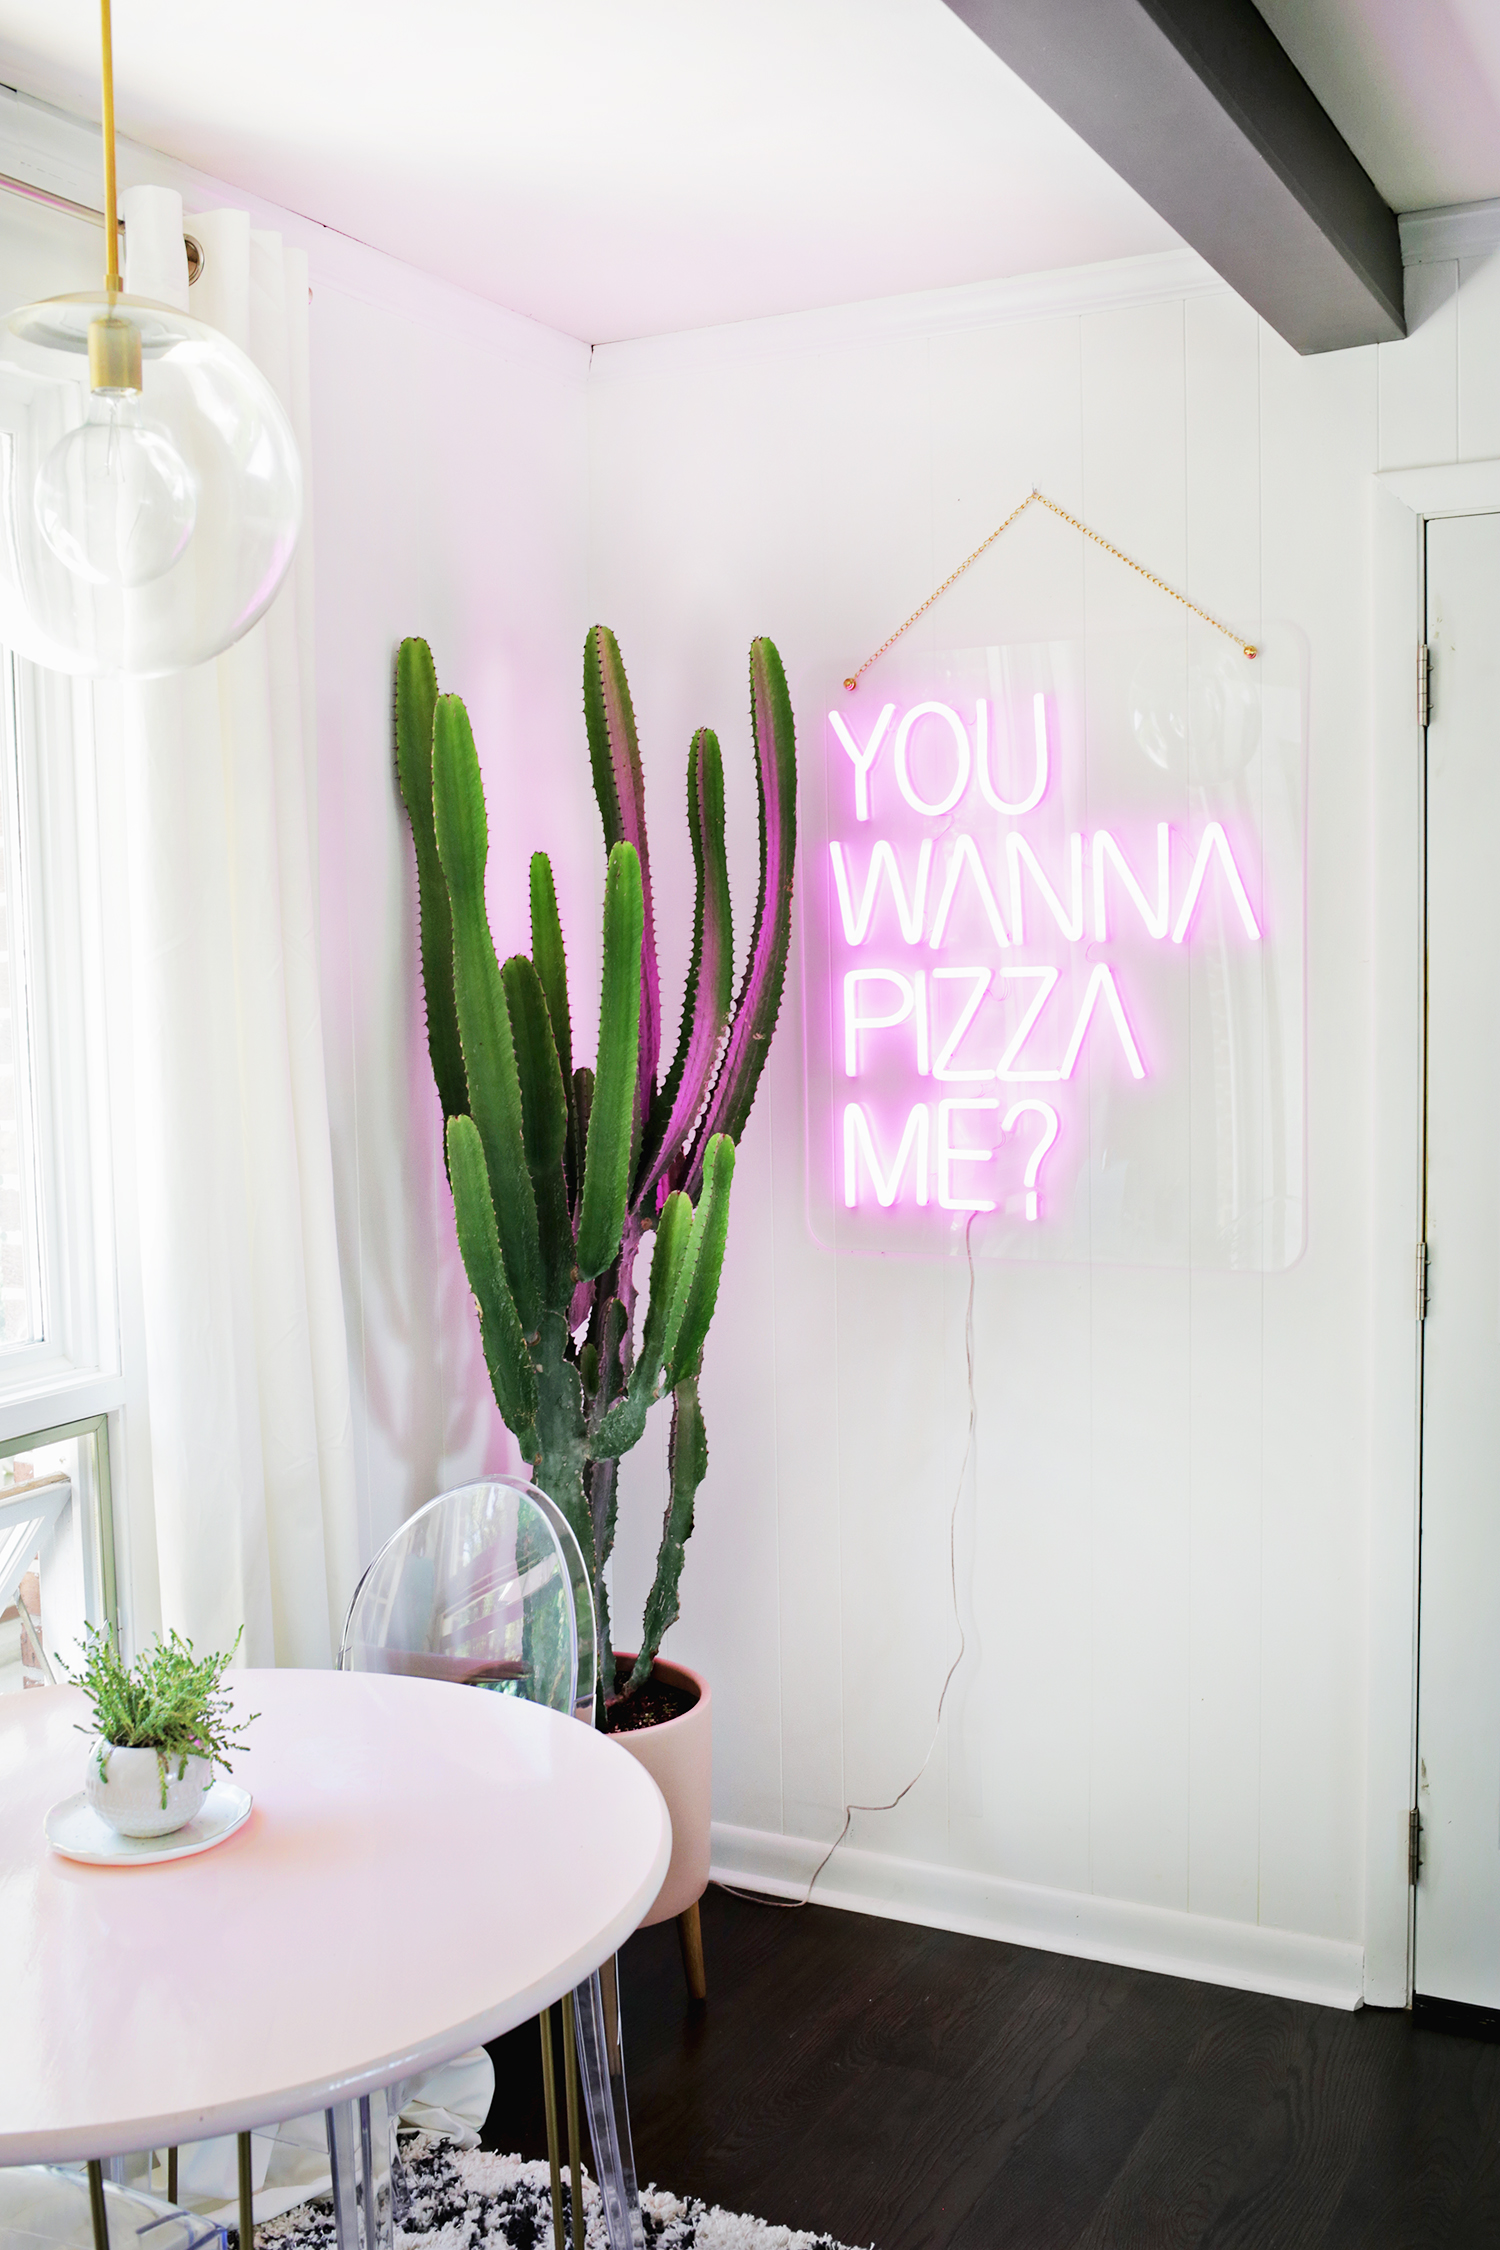 Bright-and-sassy-pink-neon-sign-